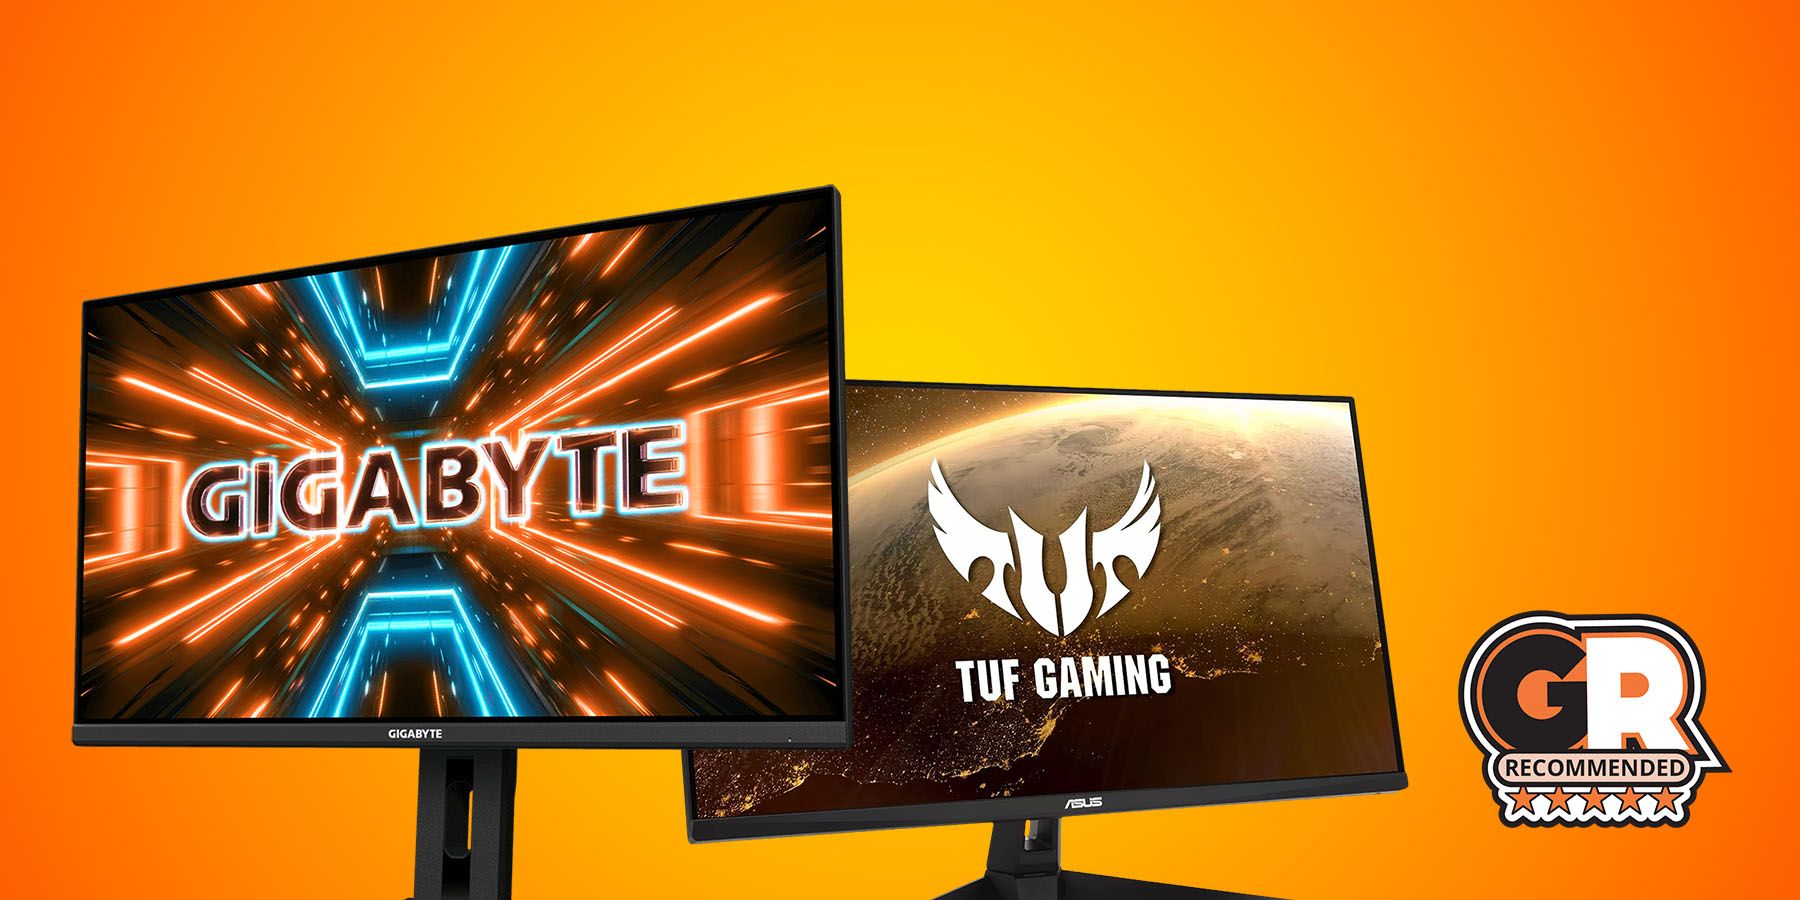 4K gaming monitors are getting cheaper, but I won't buy one